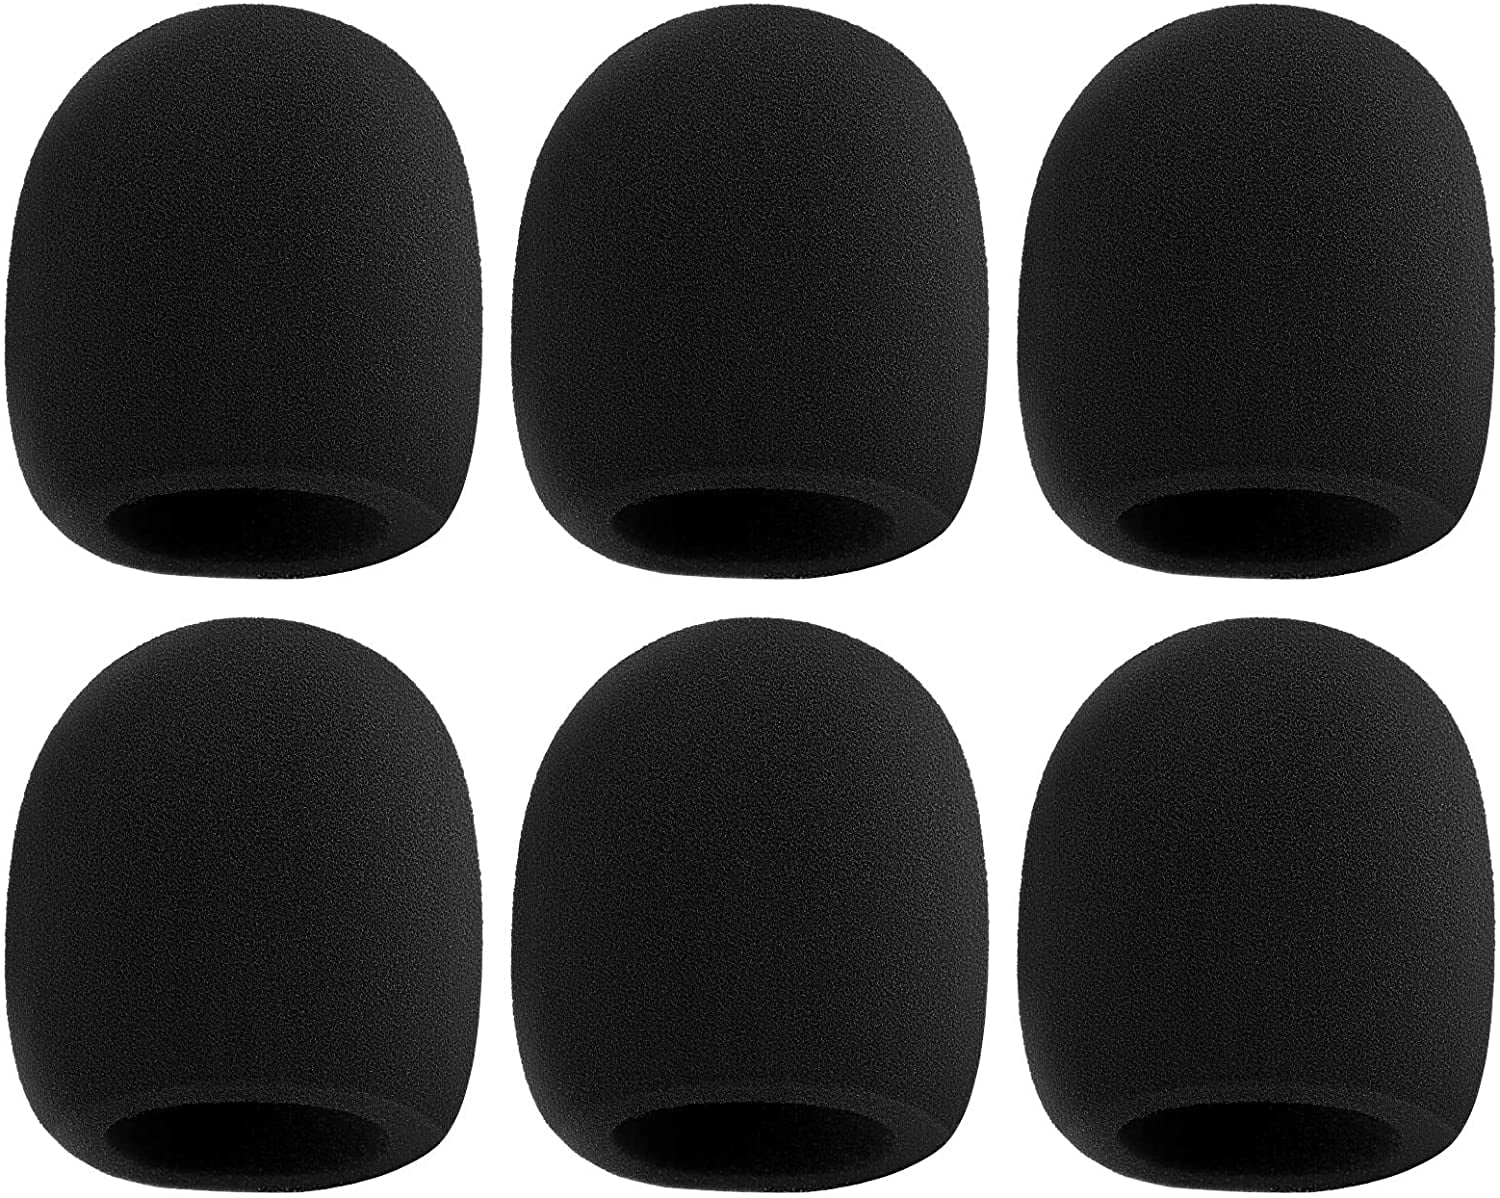 uxcell 10PCS Sponge Foam Mic Cover Handheld Microphone Windscreen Shield Protection Green for KTV Broadcasting